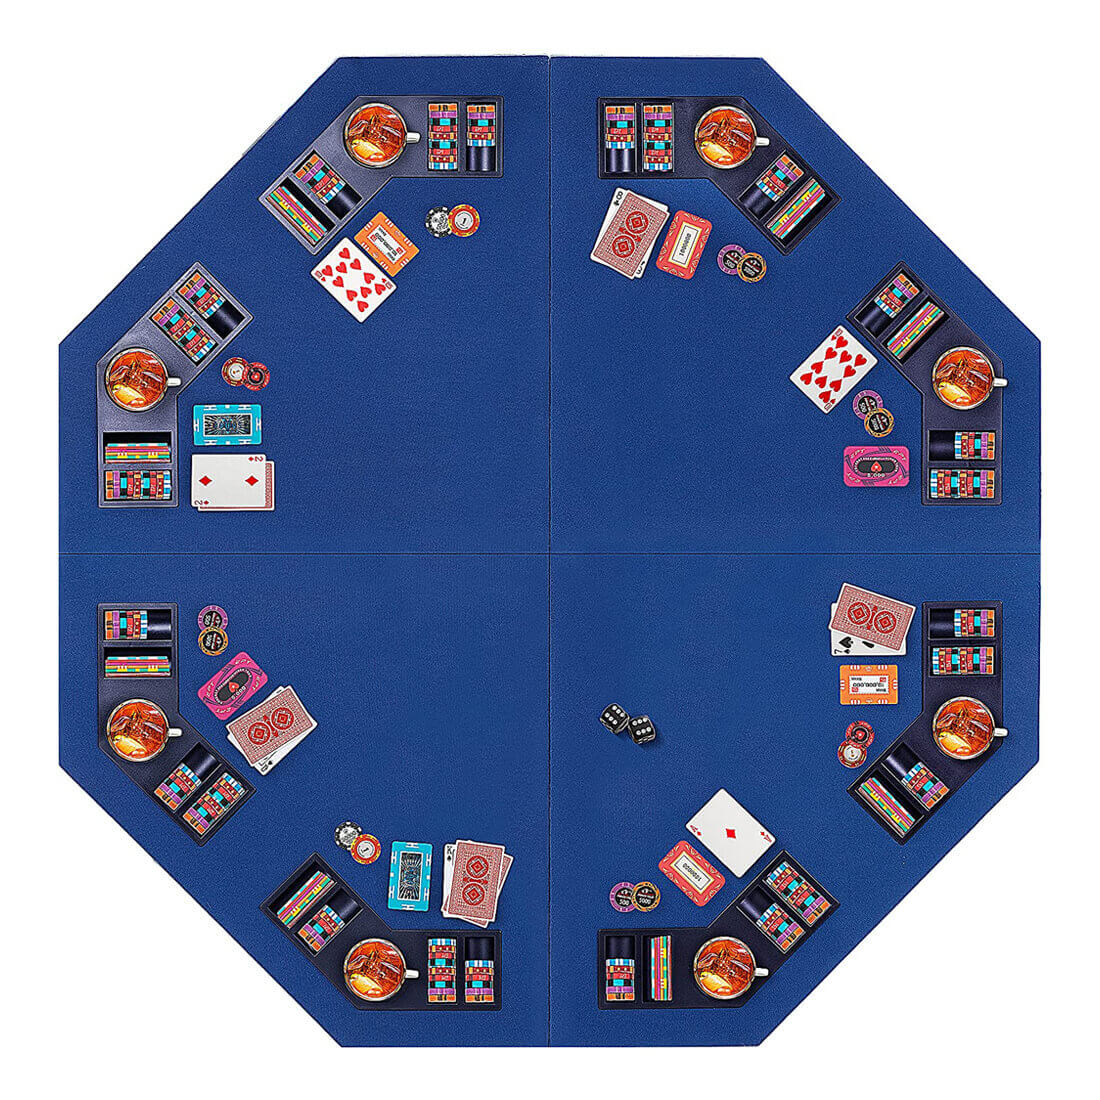 VIVOHOME 48 Inch Foldable 8-Player Texas Poker Card Tabletop Layout Portable Anti-Slip Rubber Board Game Mat with Cup Holders and Carrying Bag, Blue